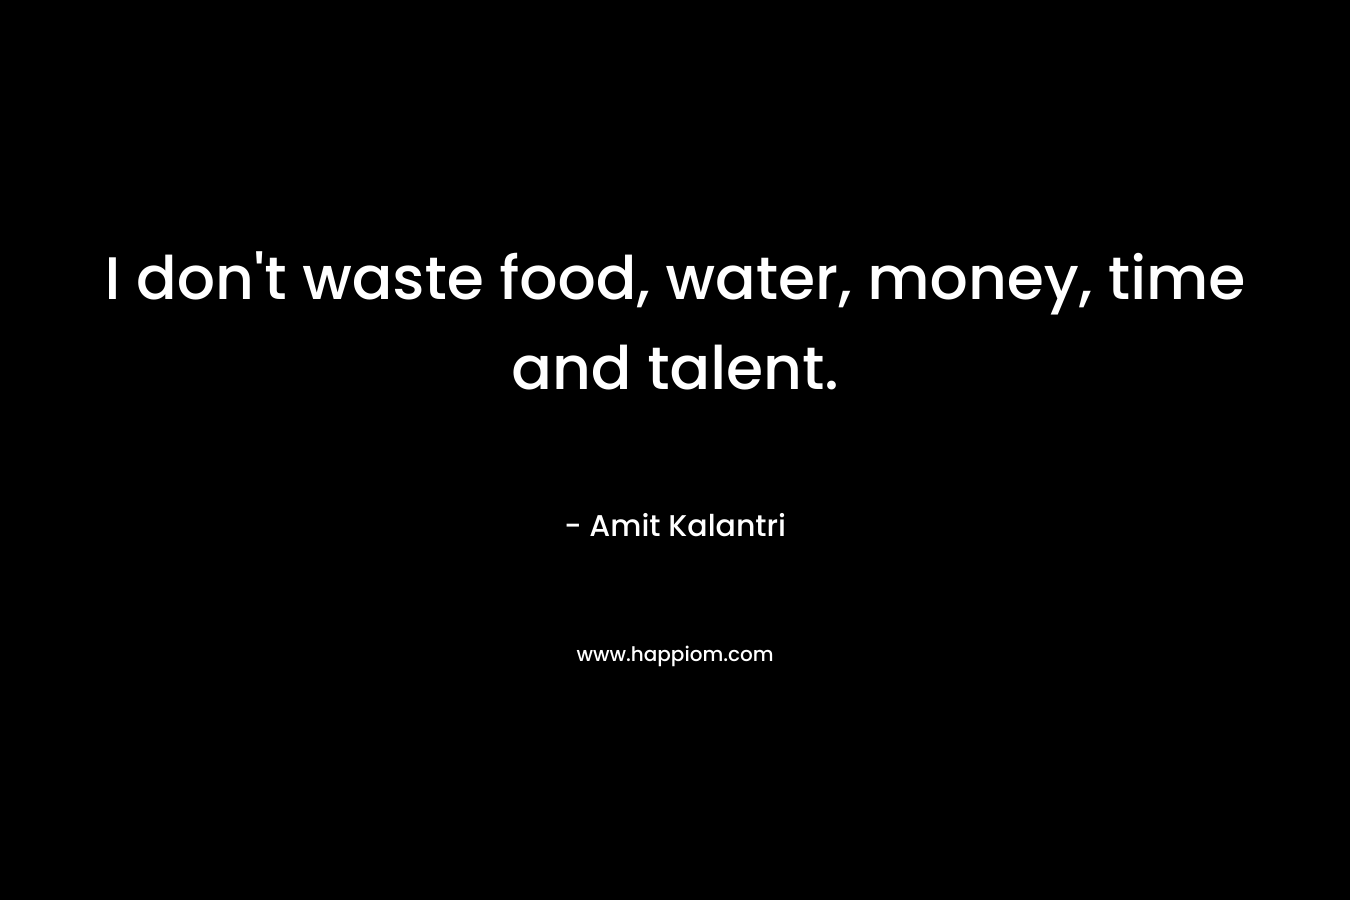 I don't waste food, water, money, time and talent.